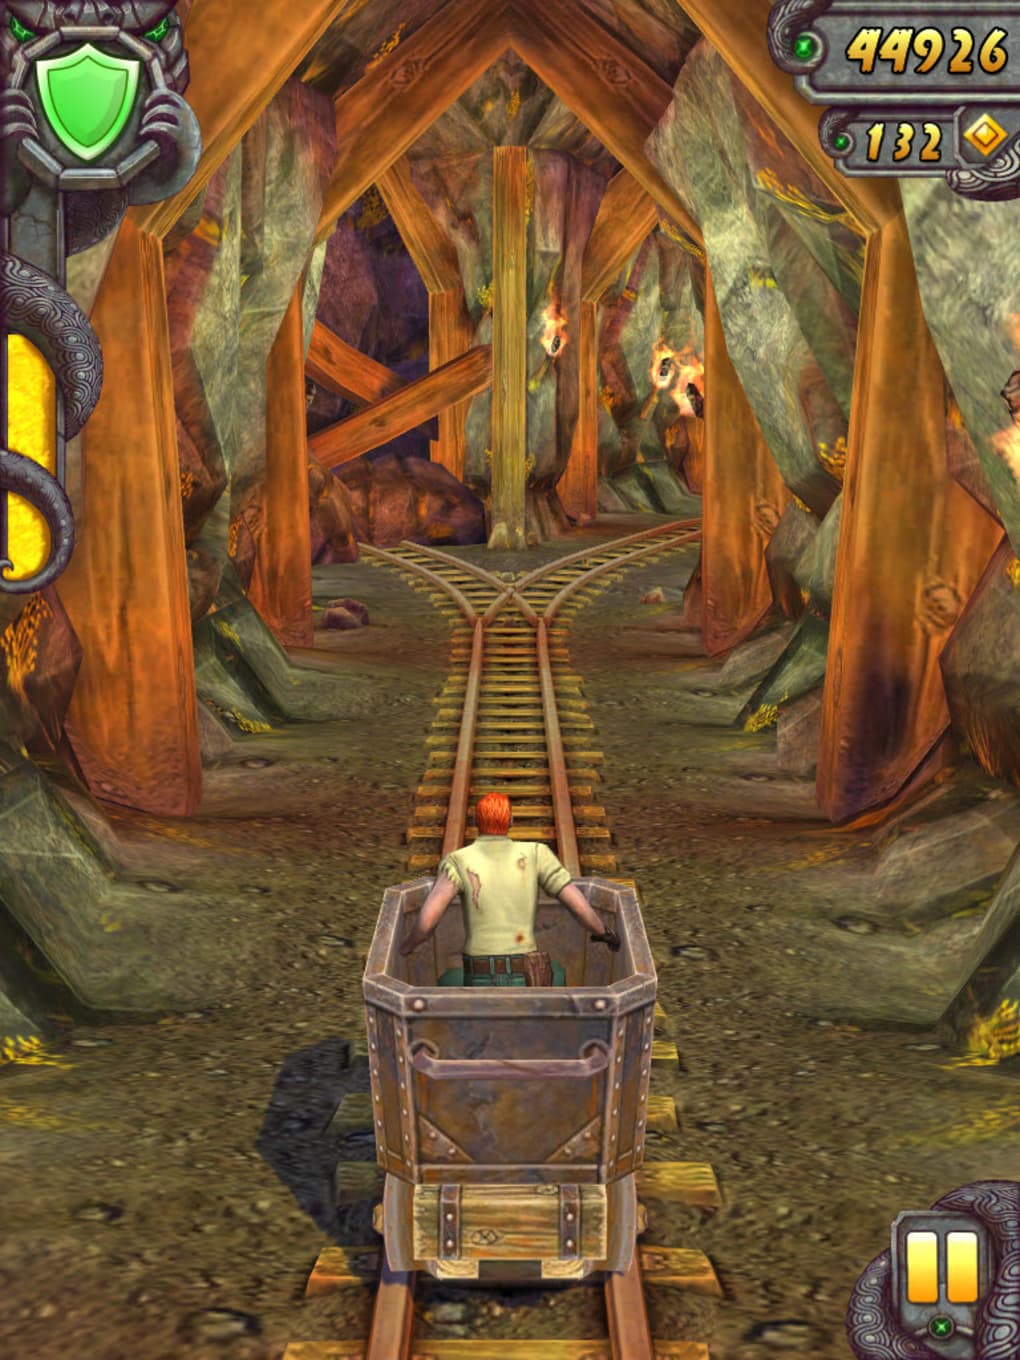 Download Temple Run 2 (MOD, Unlimited Money) 1.106.0 APK for android